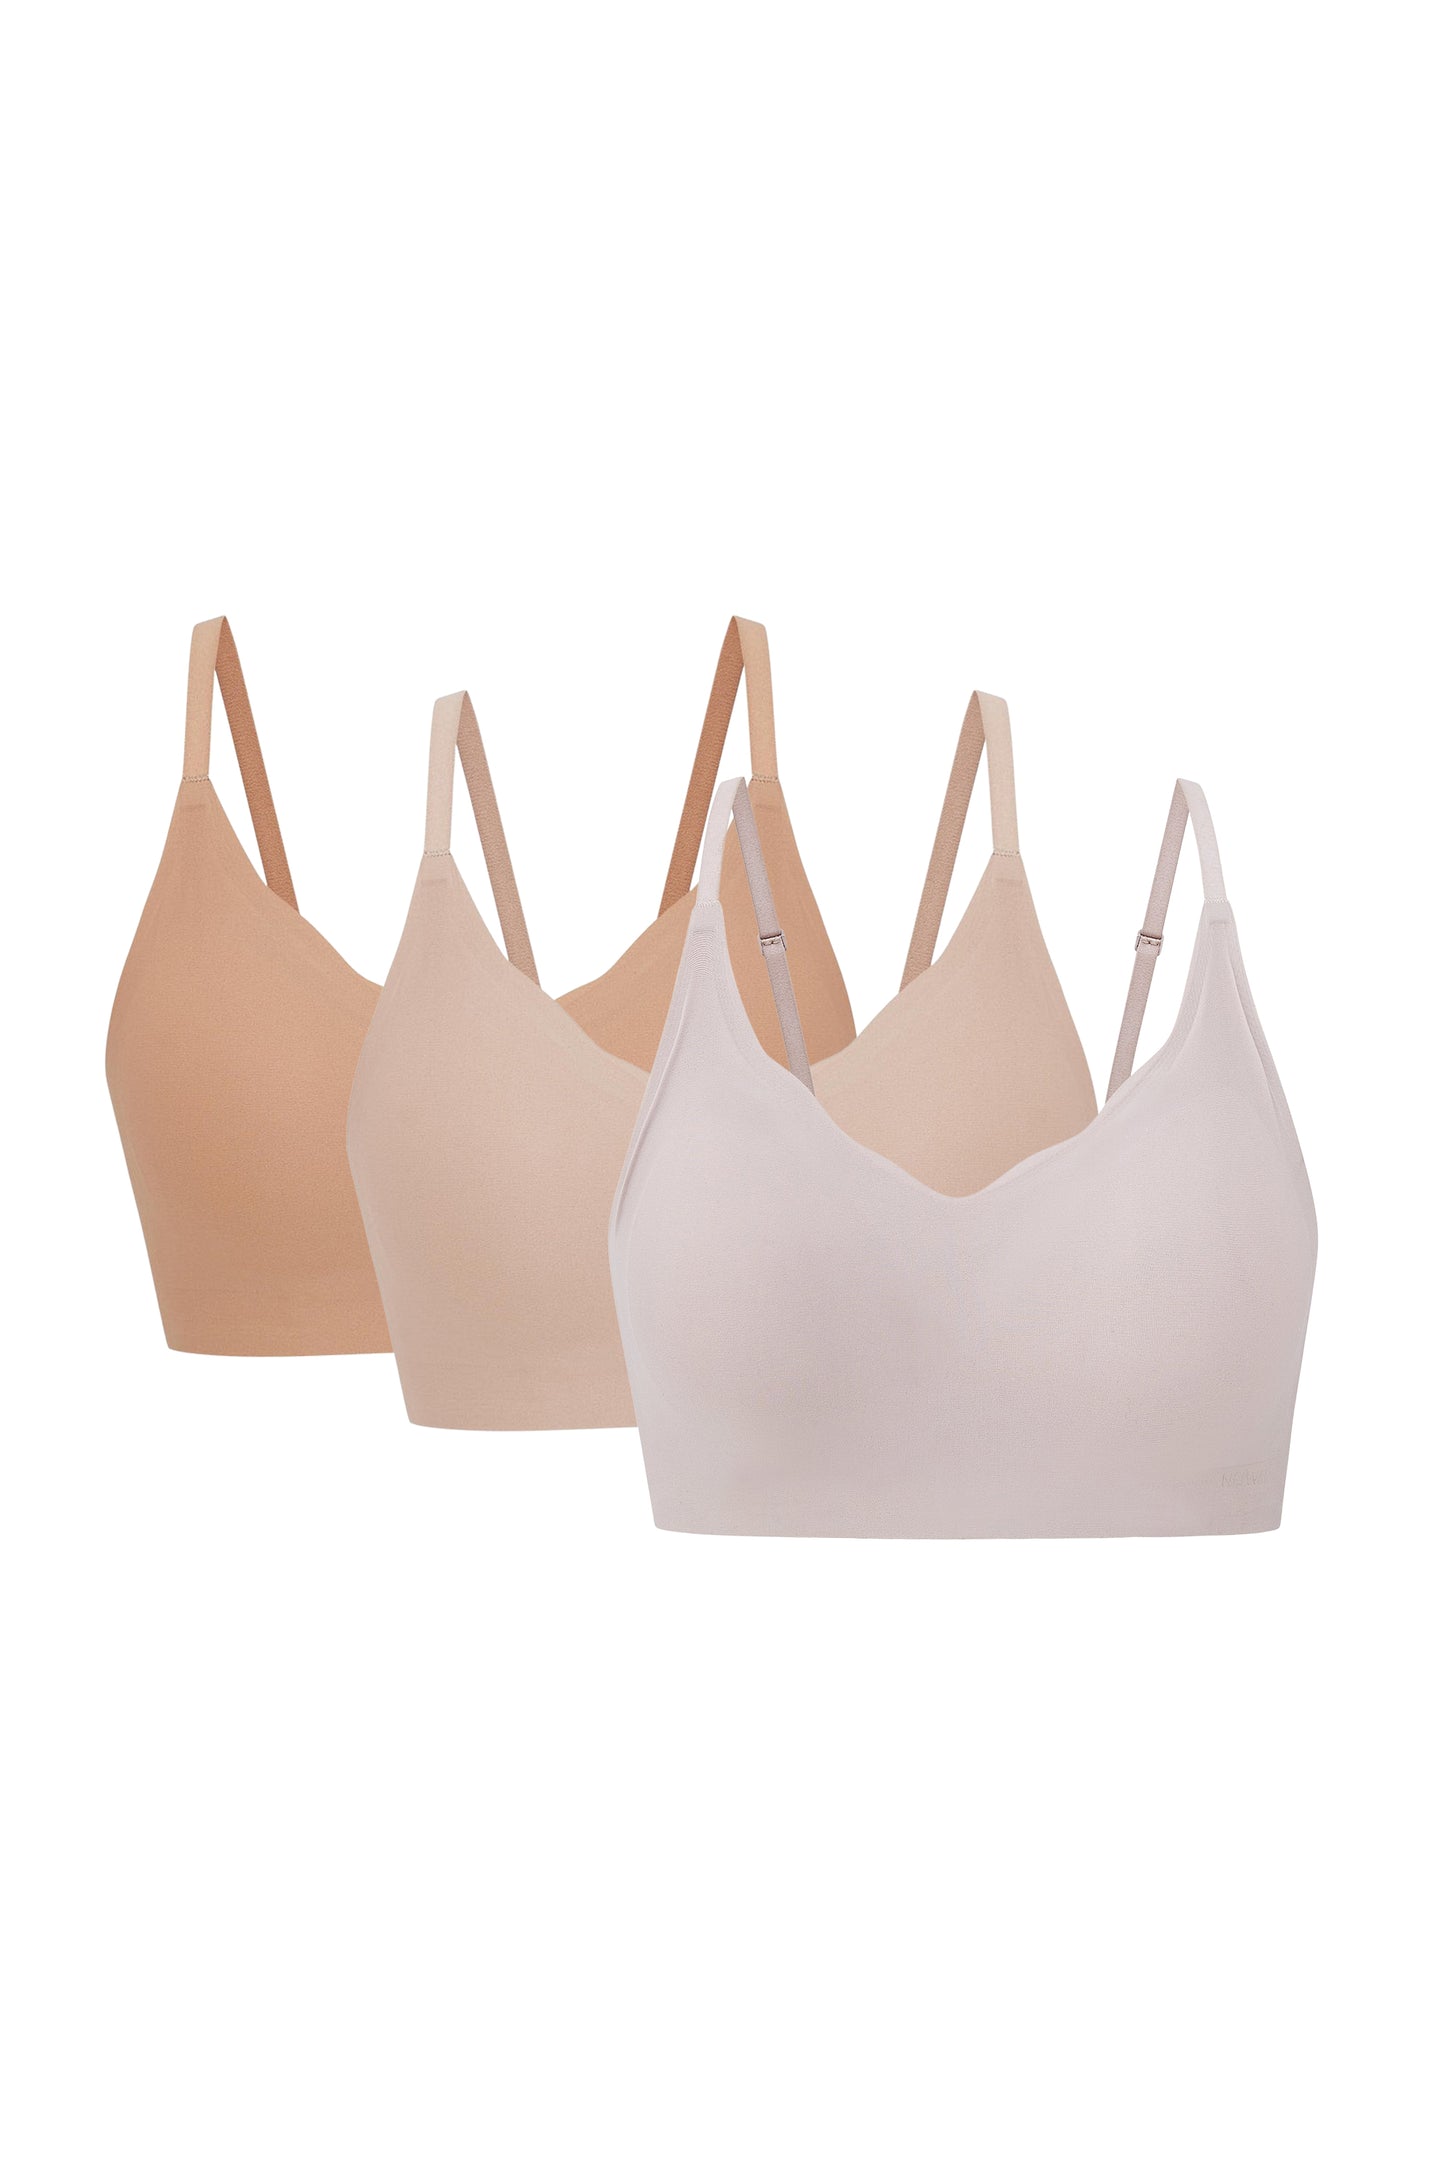 three bras in tan, beige, and light pink